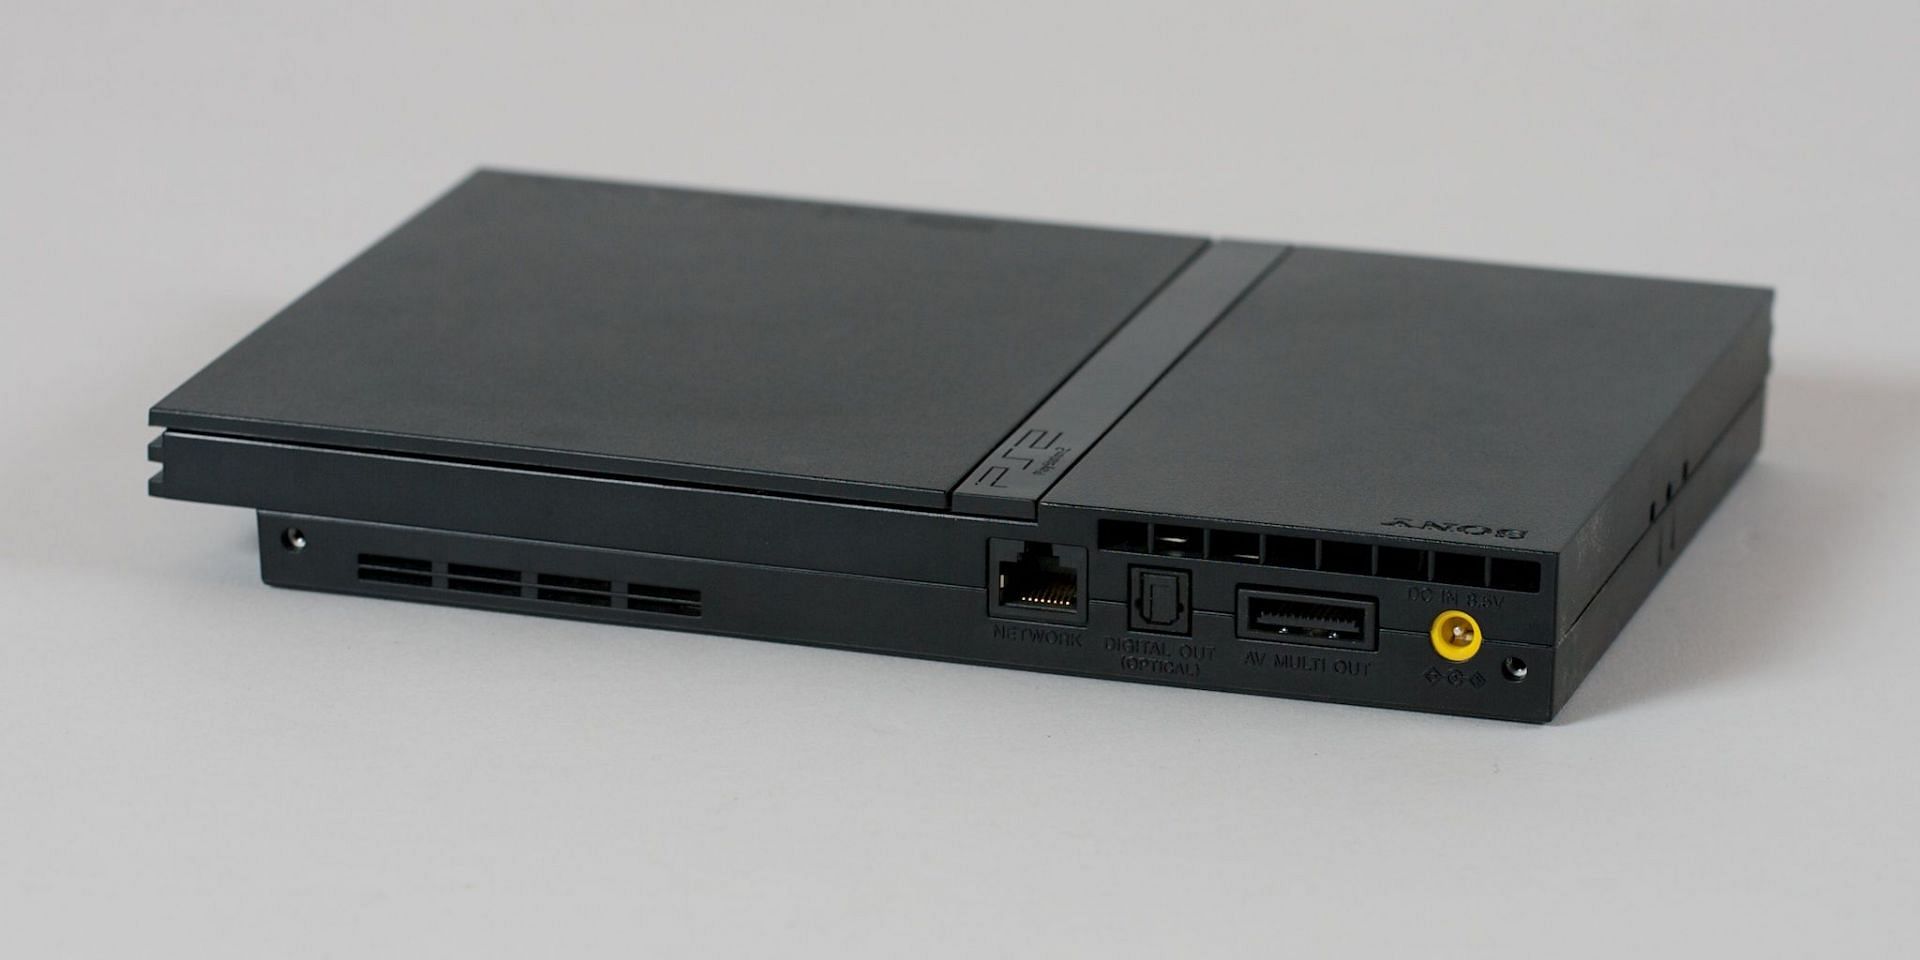 The PlayStation 2 is the best gaming console of all time (Image via Wikimedia Commons)